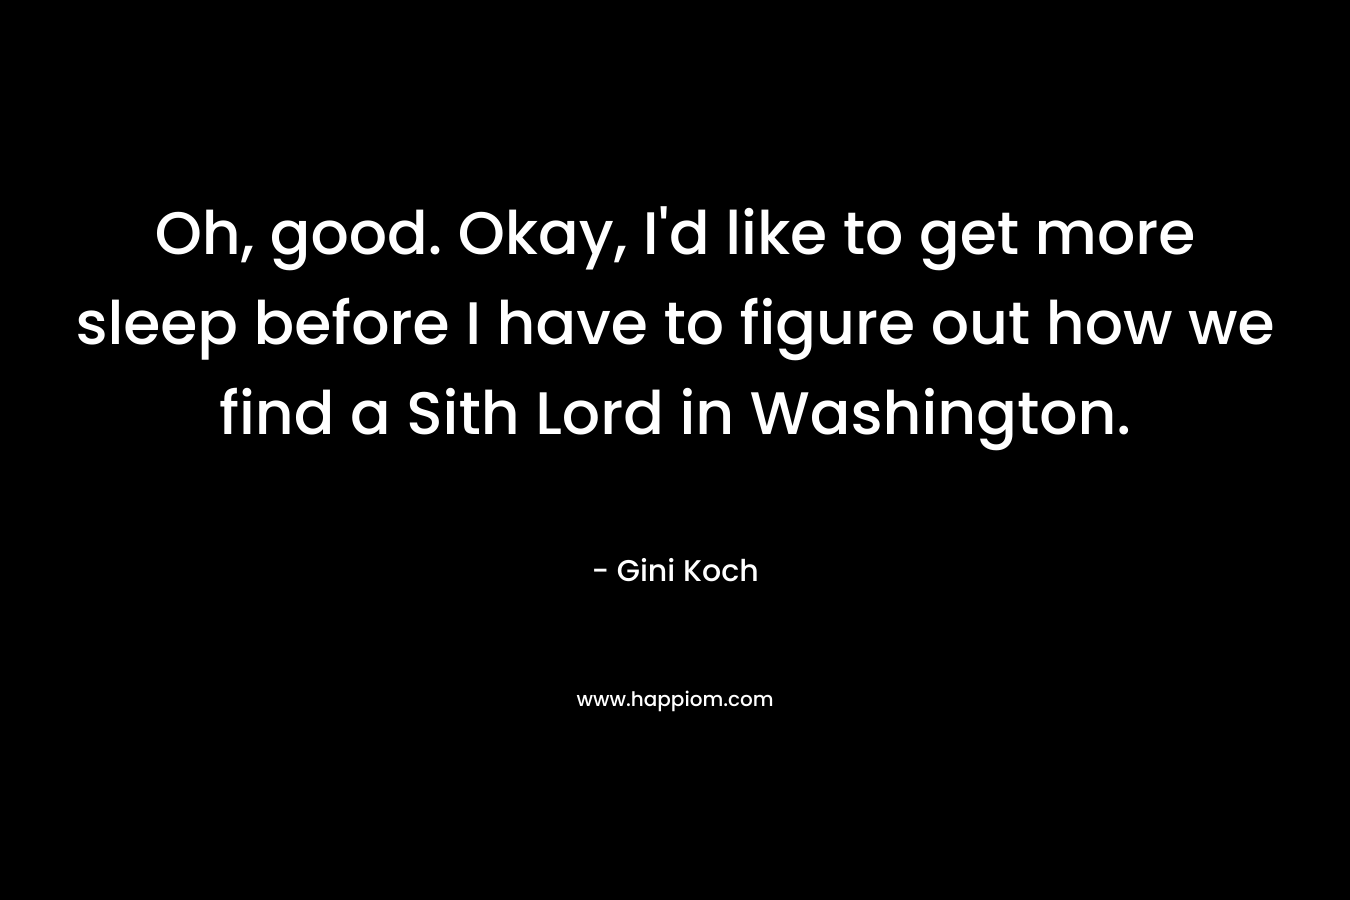 Oh, good. Okay, I’d like to get more sleep before I have to figure out how we find a Sith Lord in Washington. – Gini Koch